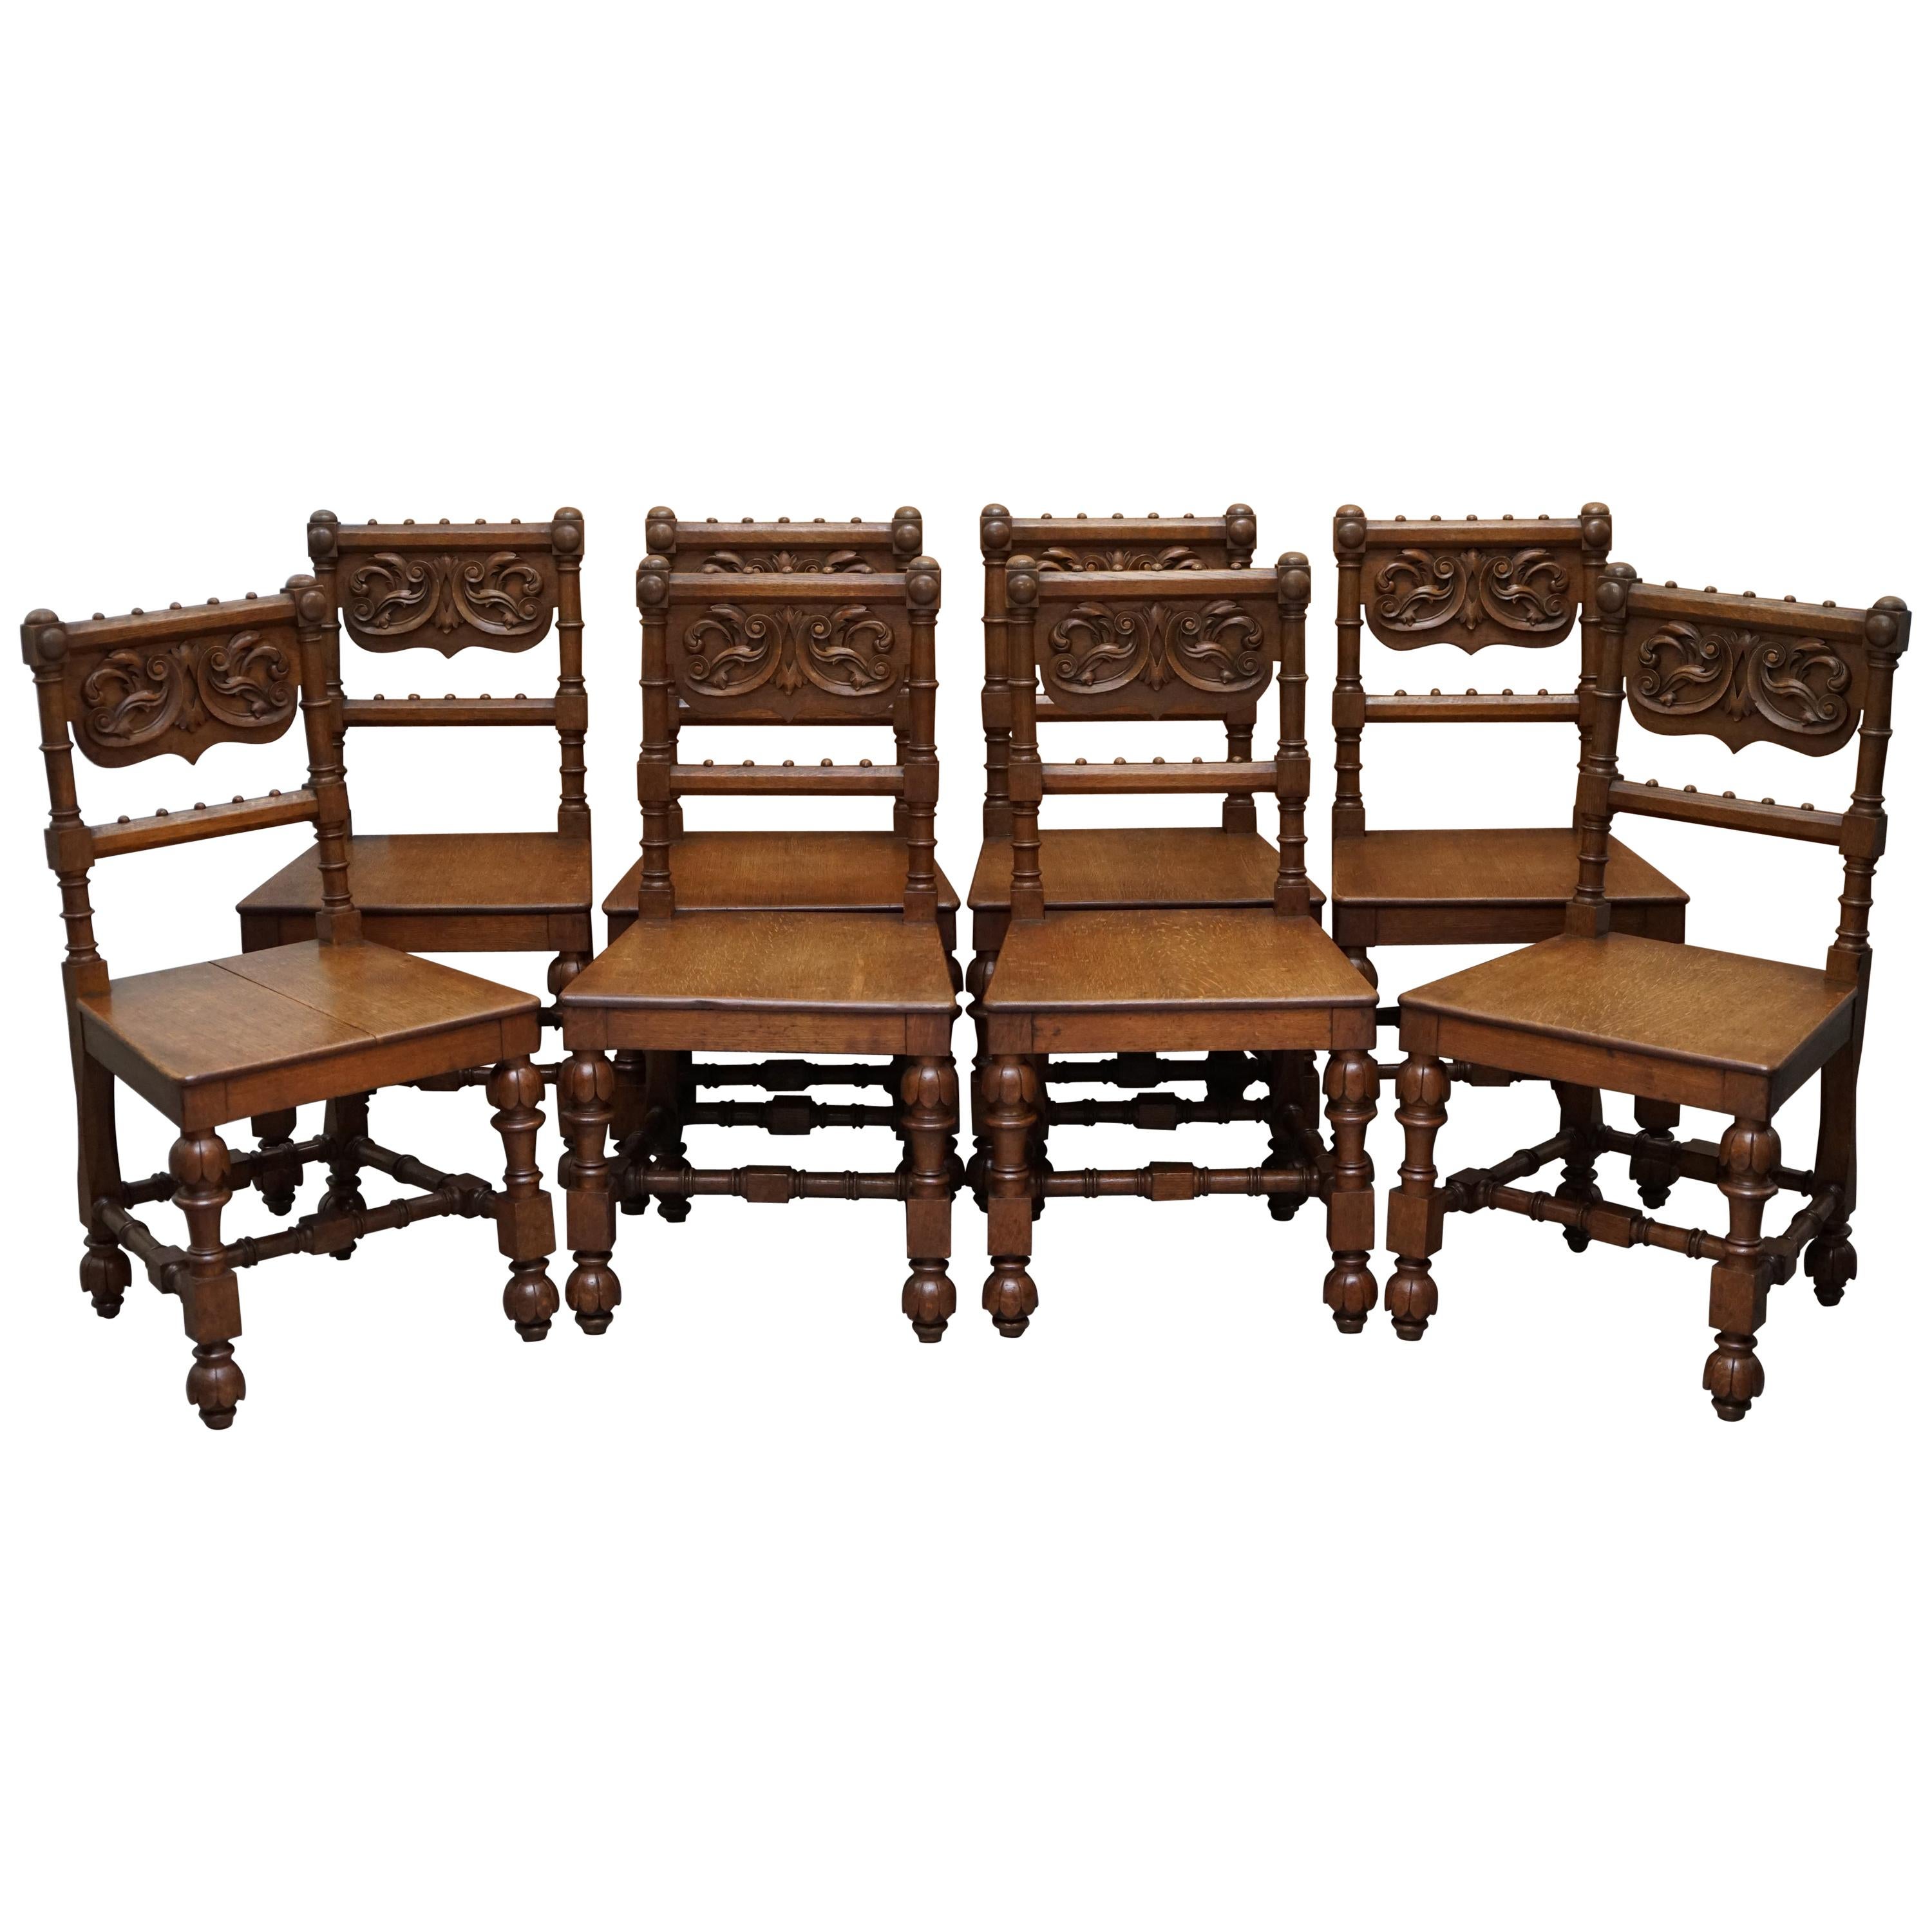 Eight Hand Carved Walnut Gothic Revival Dining Chairs circa 1840 Stunning Frames